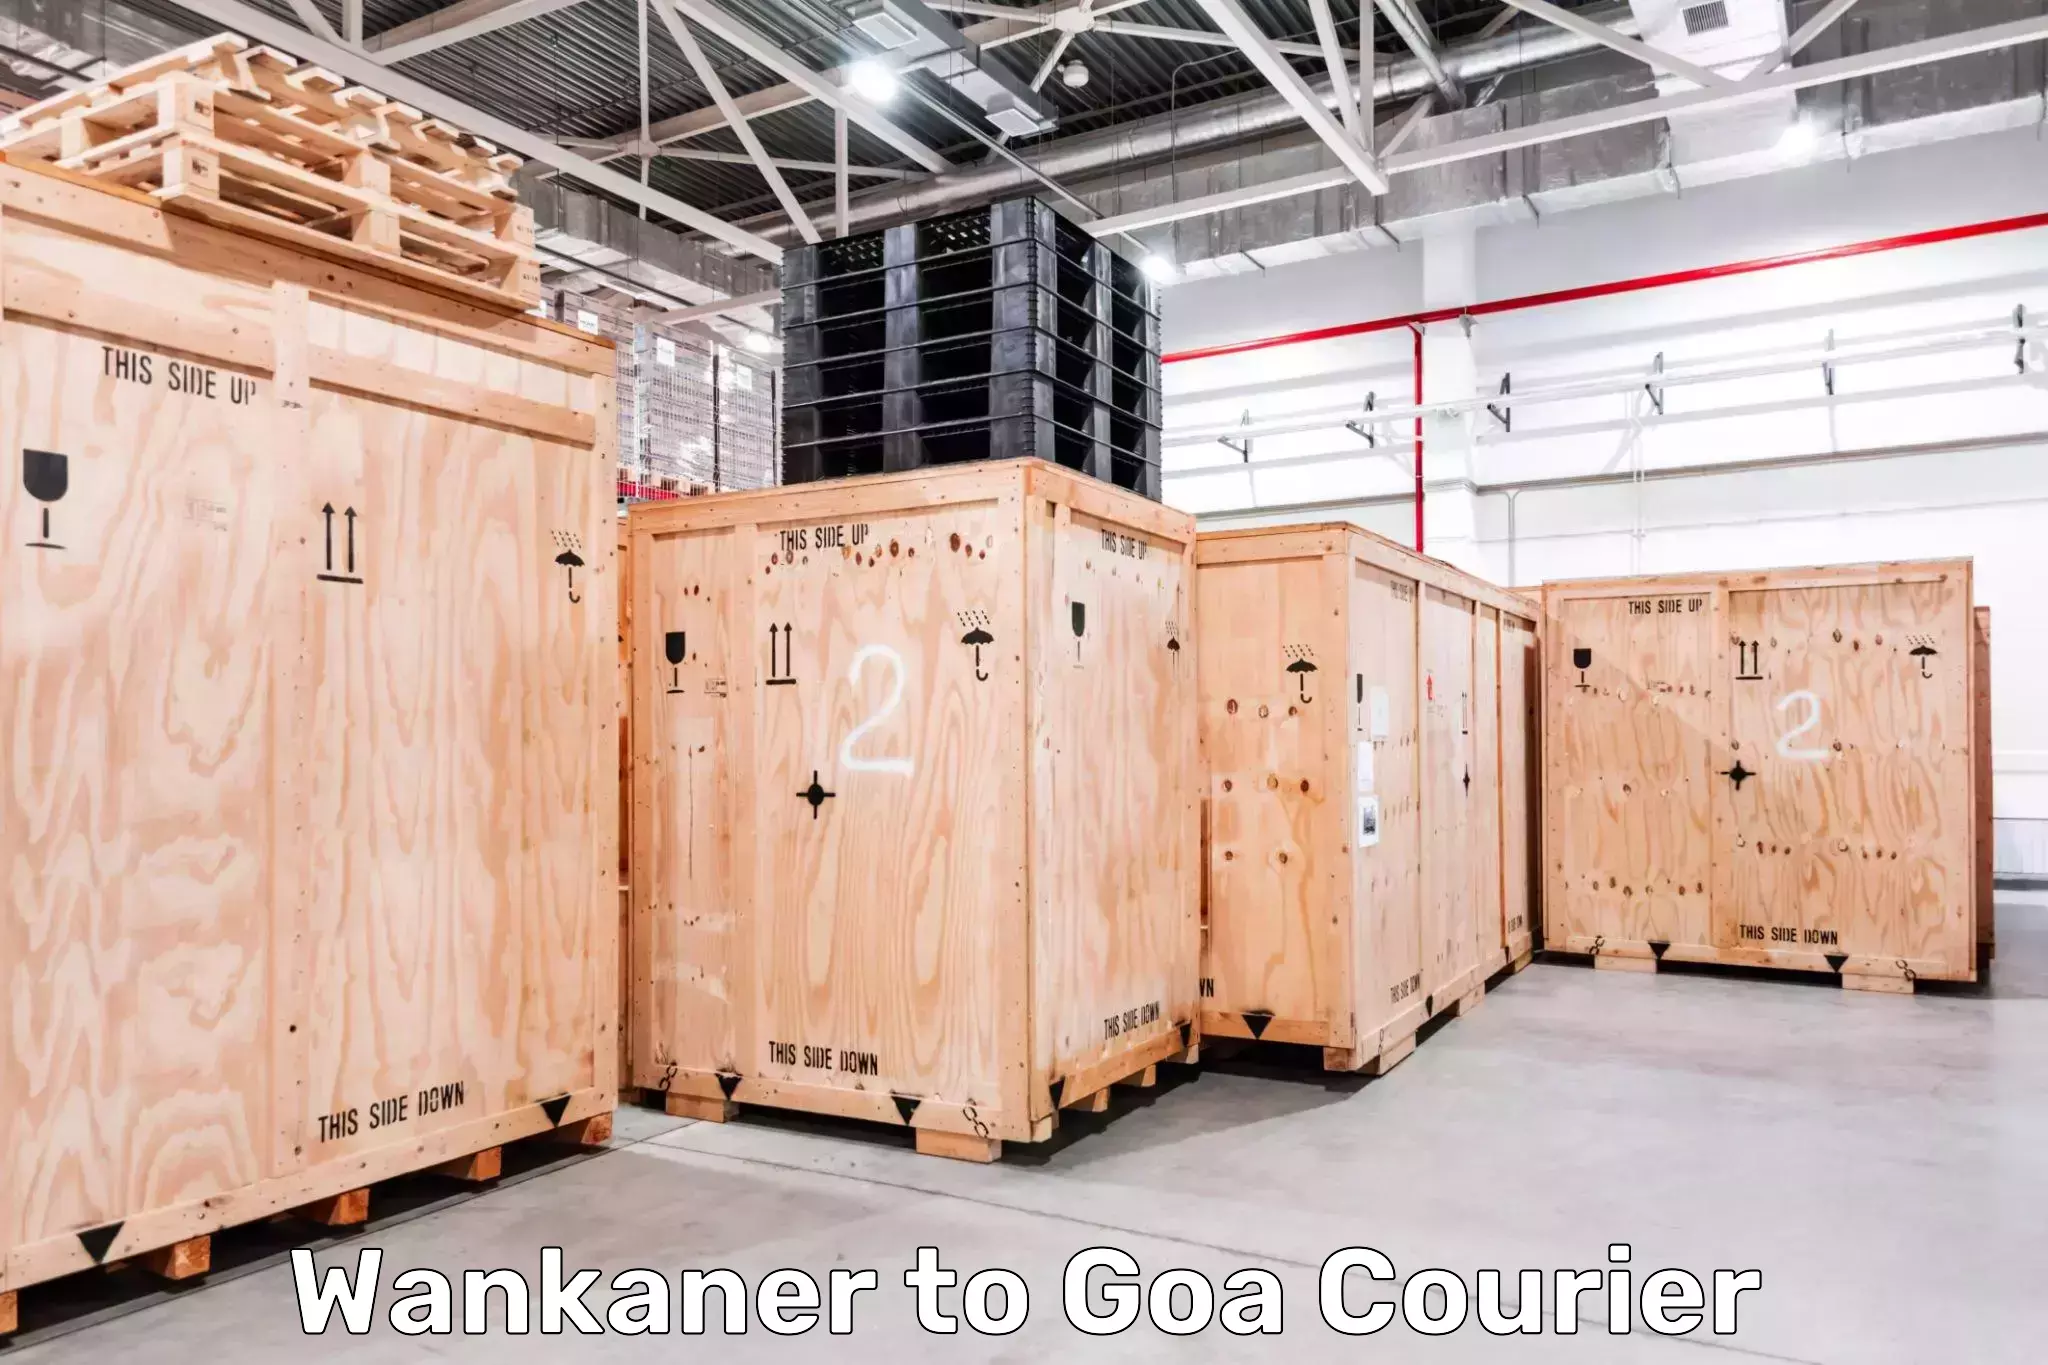 Sustainable delivery practices Wankaner to Goa